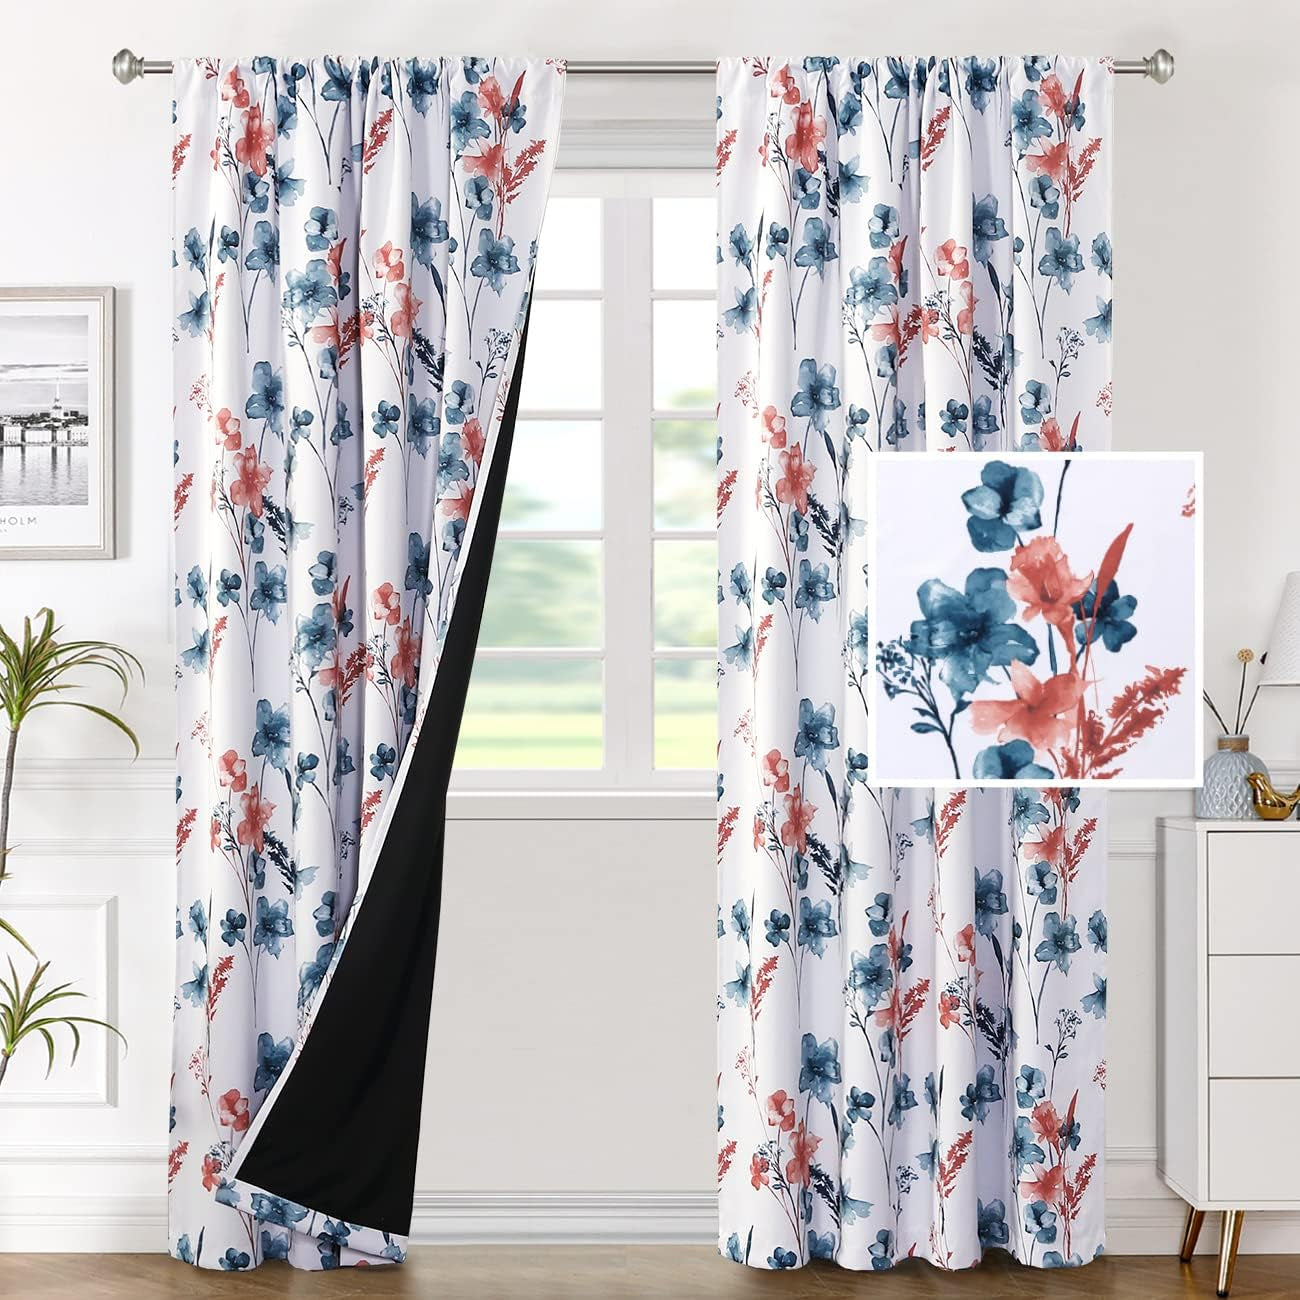 H.VERSAILTEX 100% Blackout Curtains for Bedroom Cattleya Floral Printed Drapes 84 Inches Long Leah Floral Pattern Full Light Blocking Drapes with Black Liner Rod Pocket 2 Panels, Navy/Taupe  H.VERSAILTEX Stone Blue/Coral 52"W X 84"L 